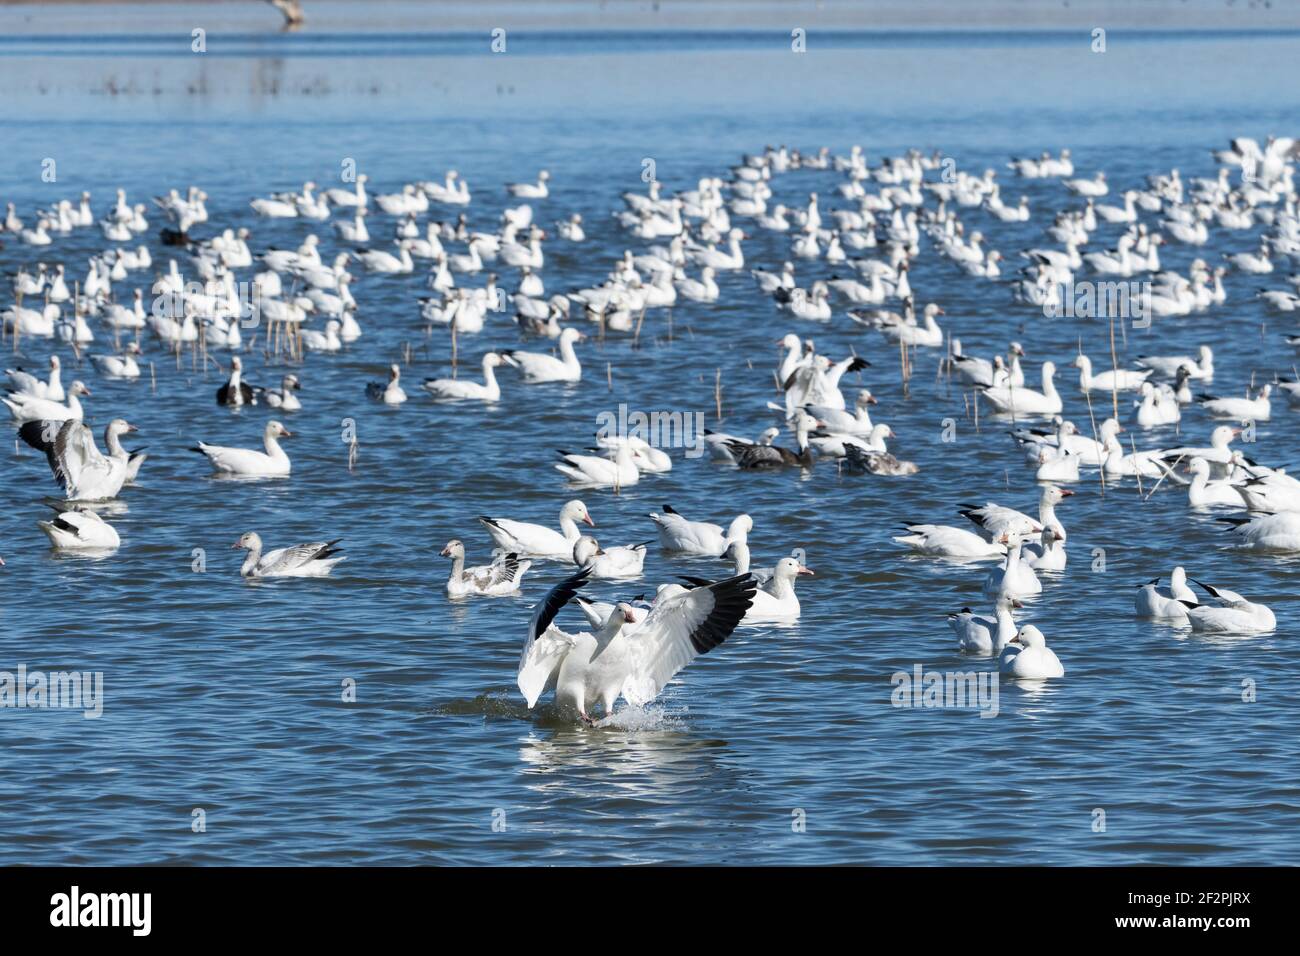 A Snow Goose landing on a pond in the Bosque del Apache National Wildlife Refuge, New Mexico. Stock Photo